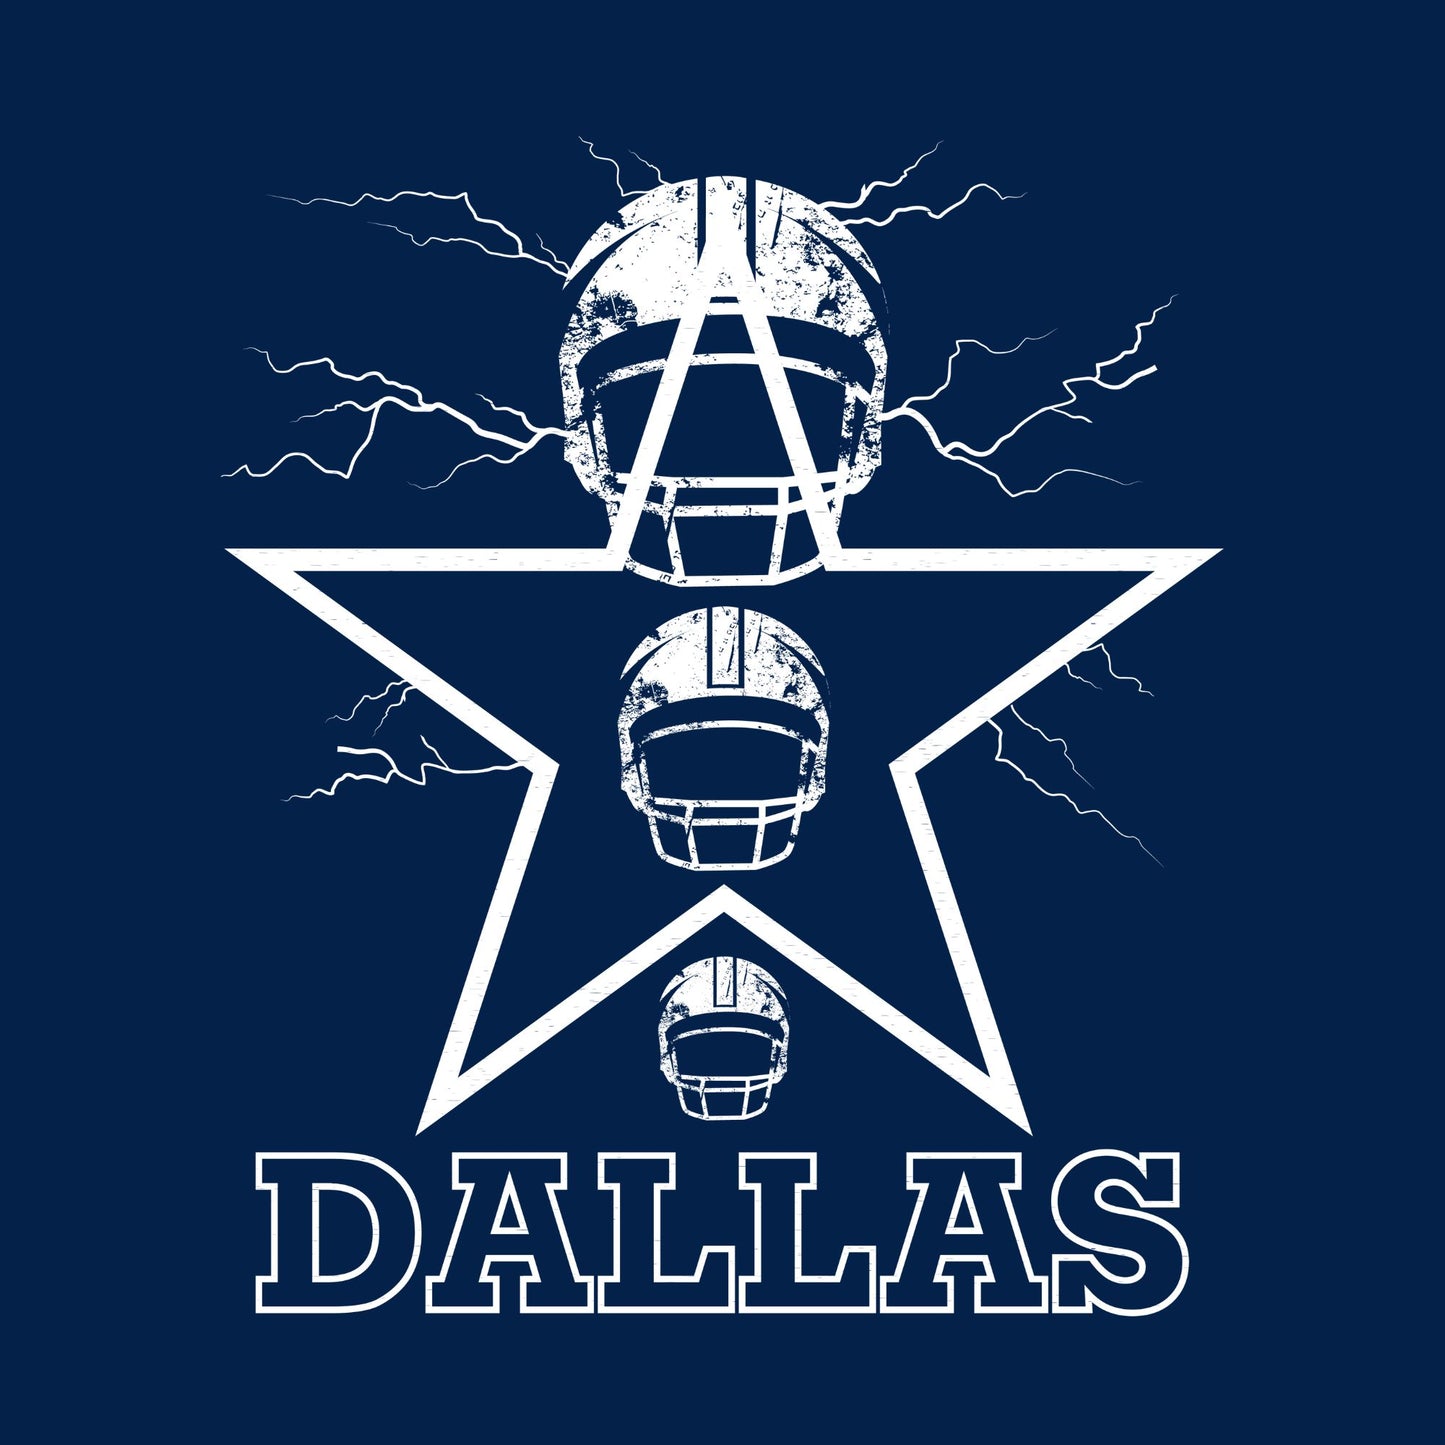 Dallas Football Pride T-Shirt: Stylish Design with Football Helmets and Star Accents - Perfect for True Dallas Fans